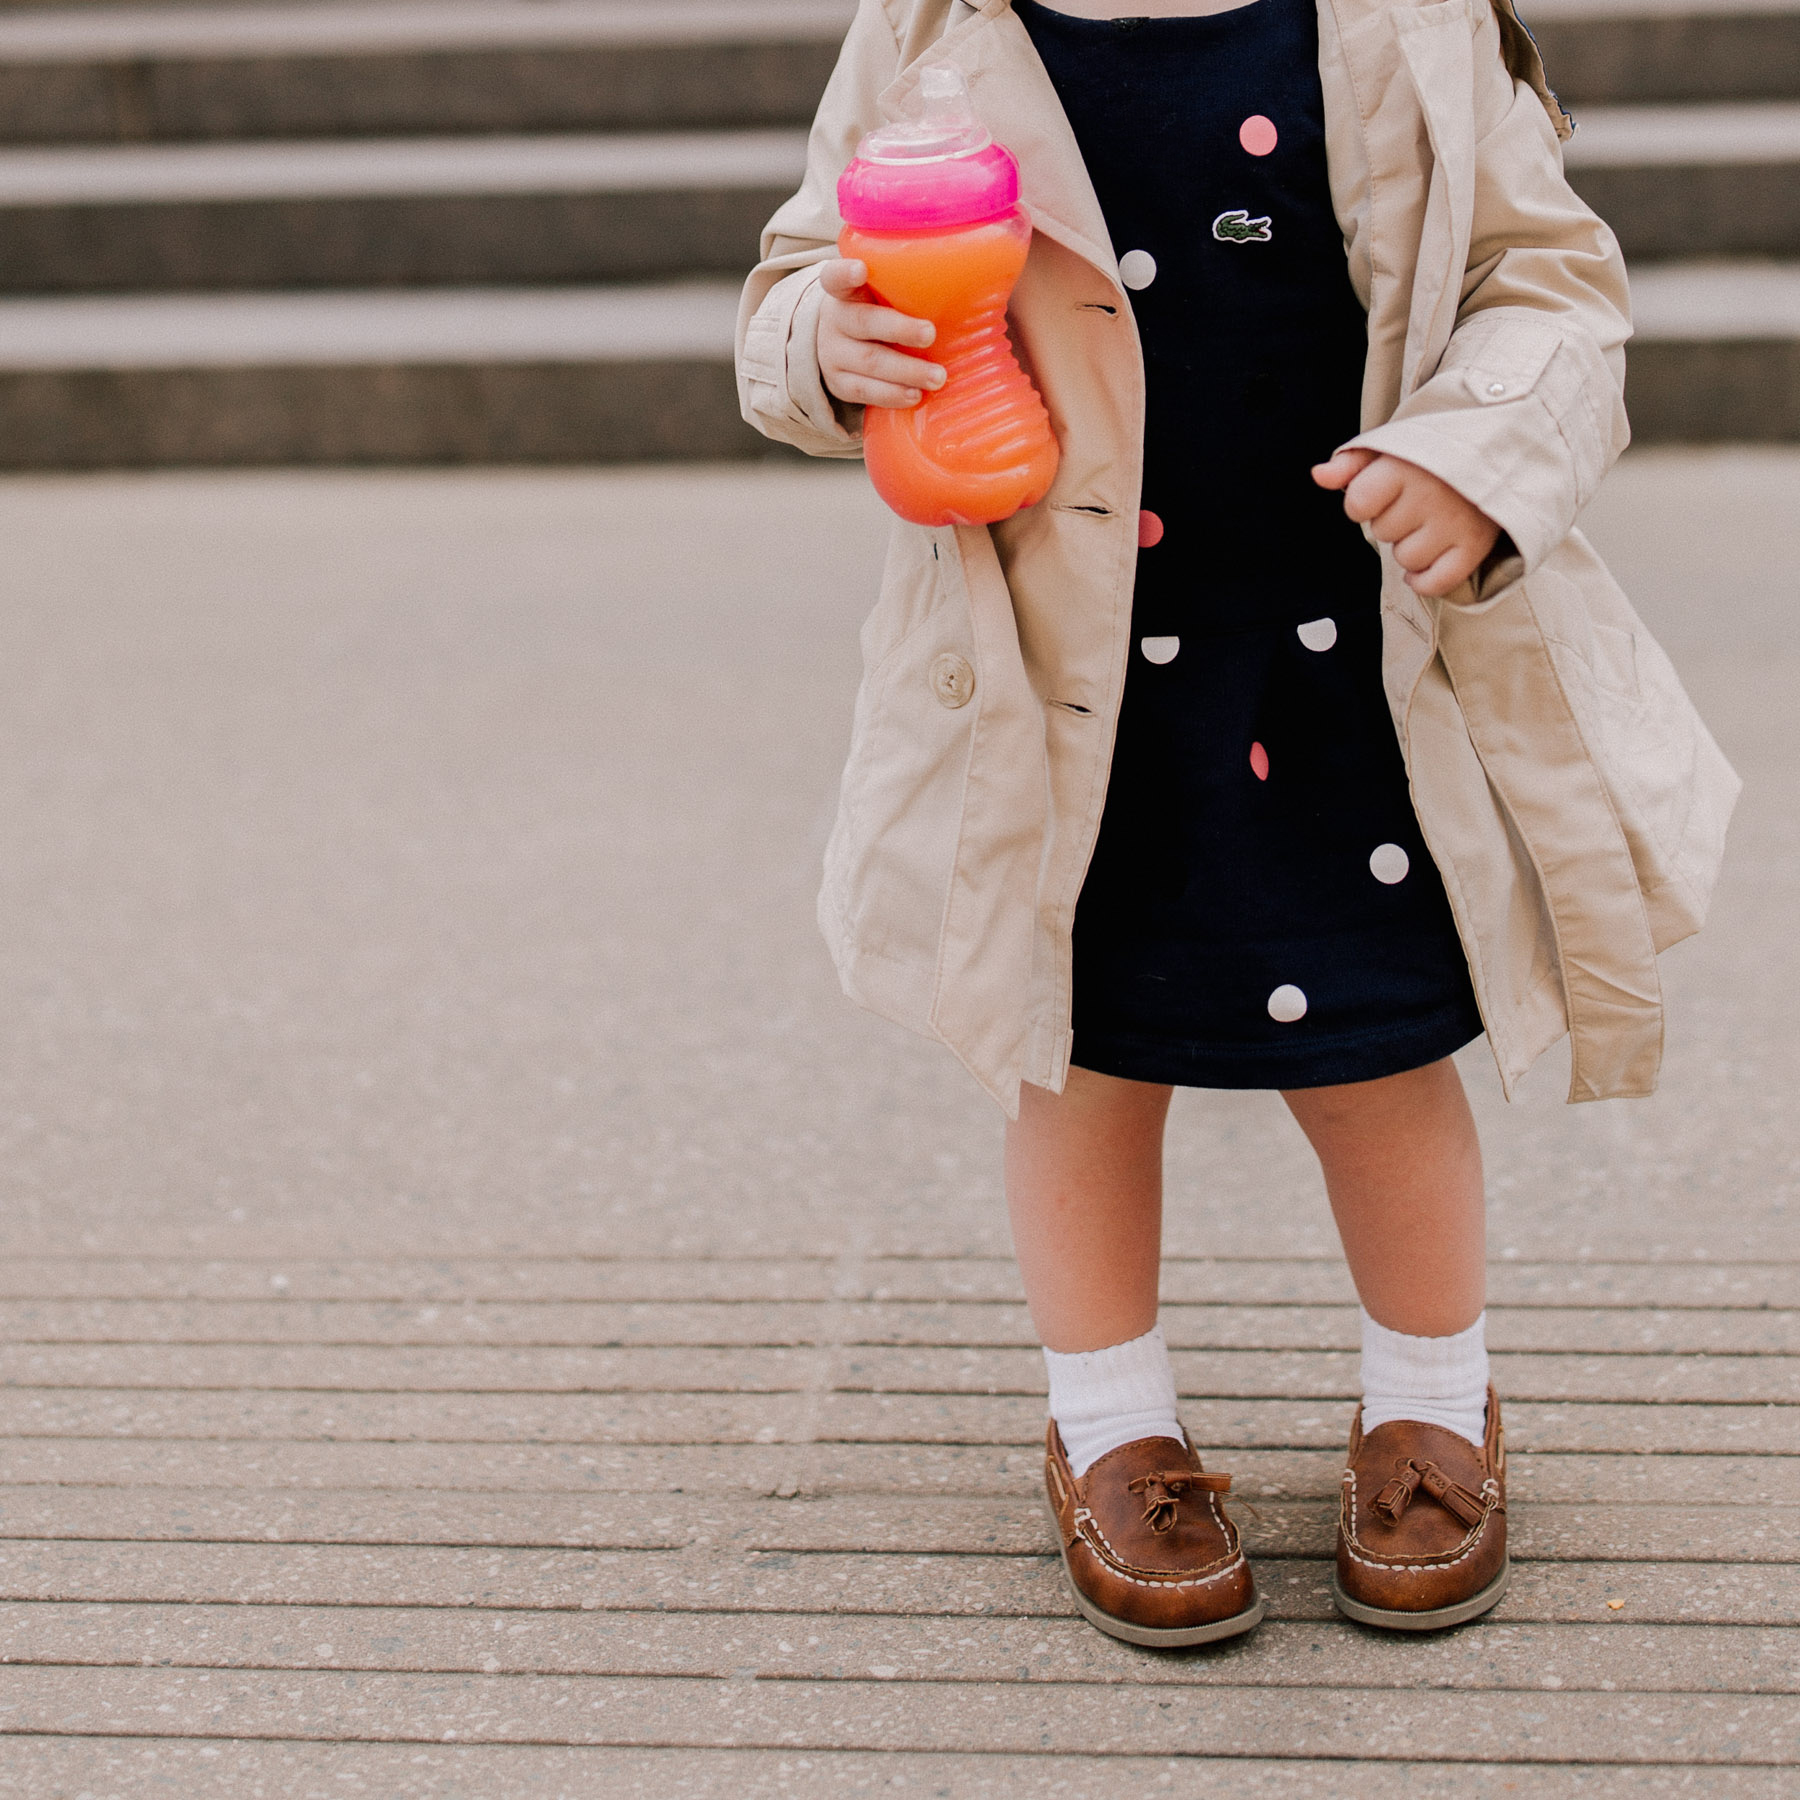 Toddler in a Trench Coat